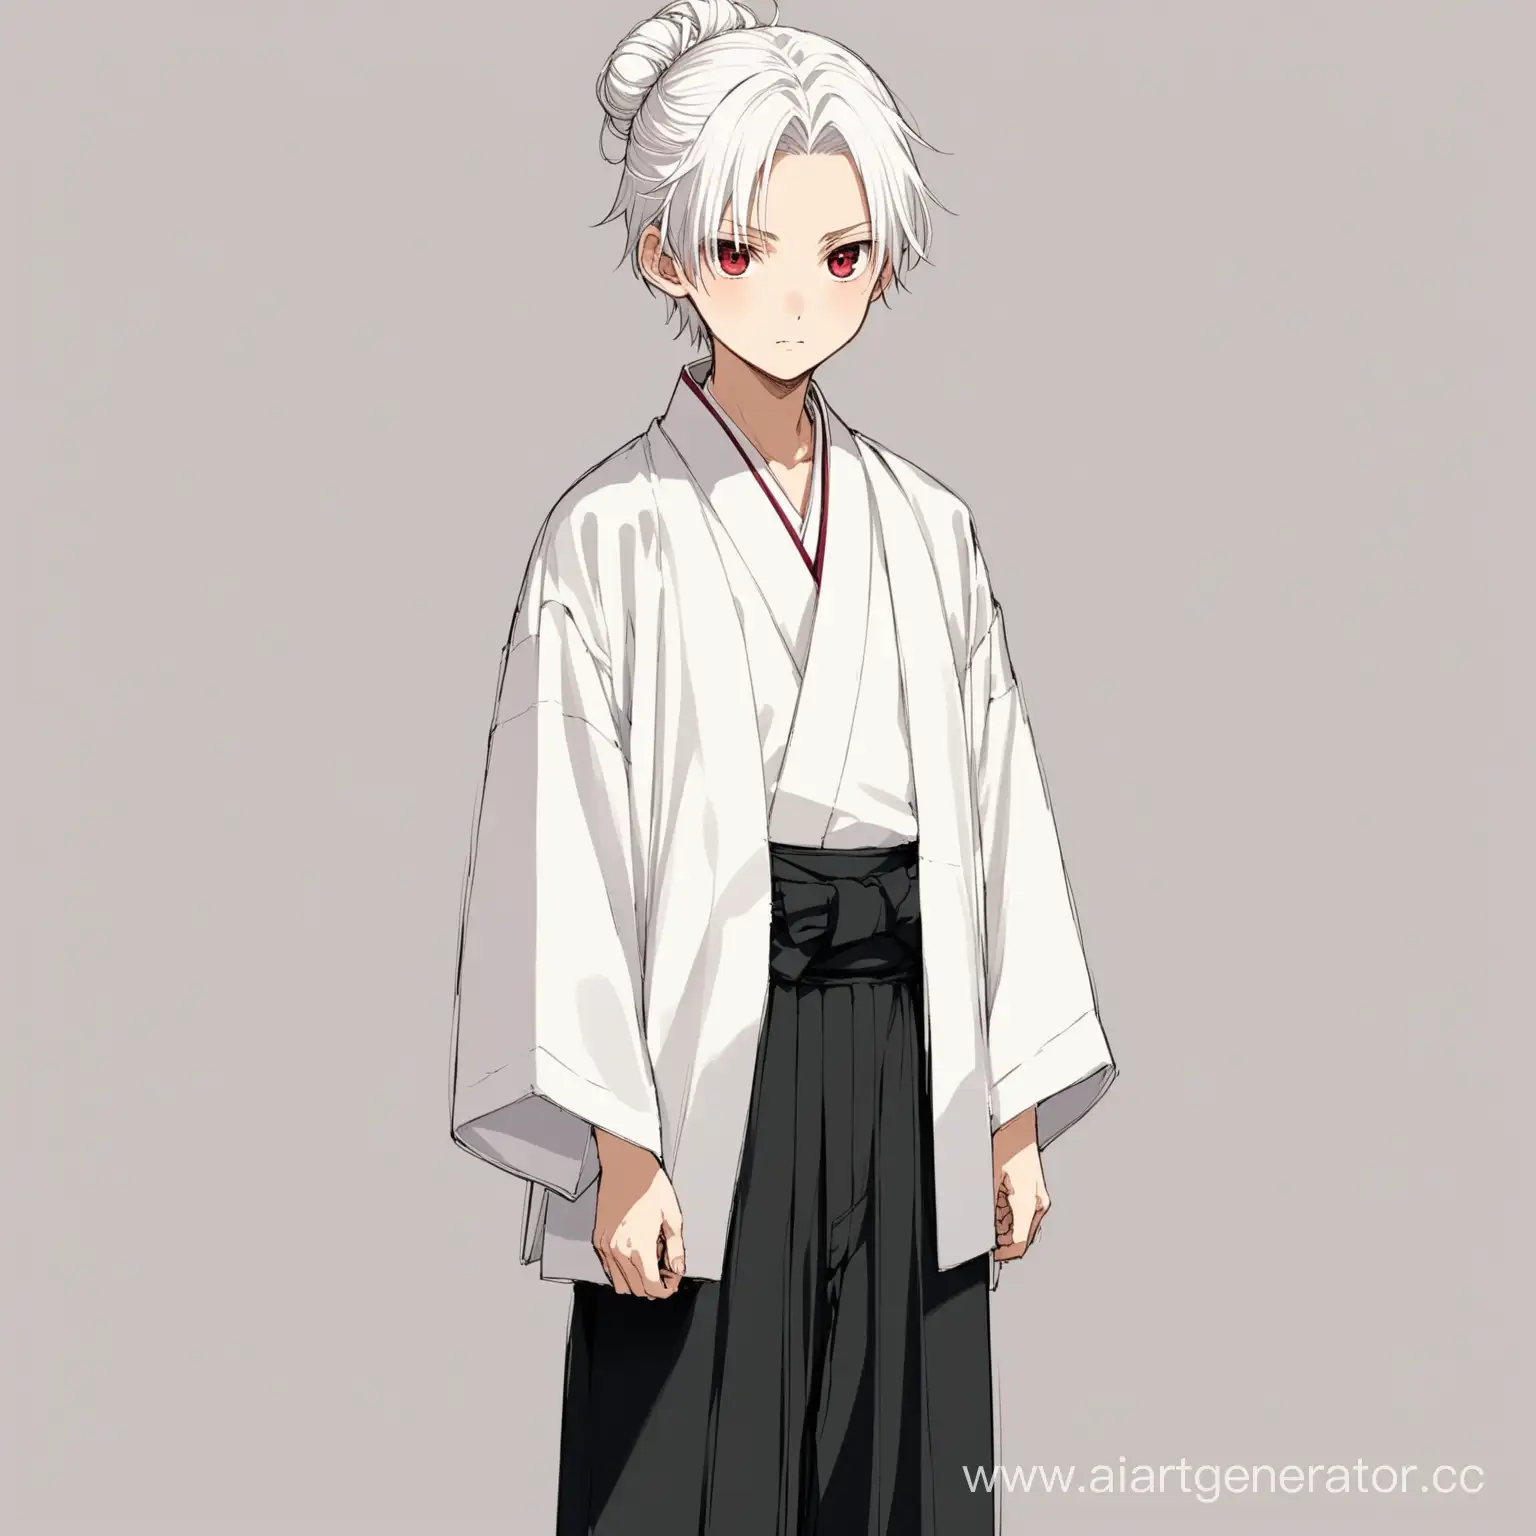 Young-Boy-in-Elegant-White-Kimono-with-RubyRed-Eyes-and-Delicate-Features